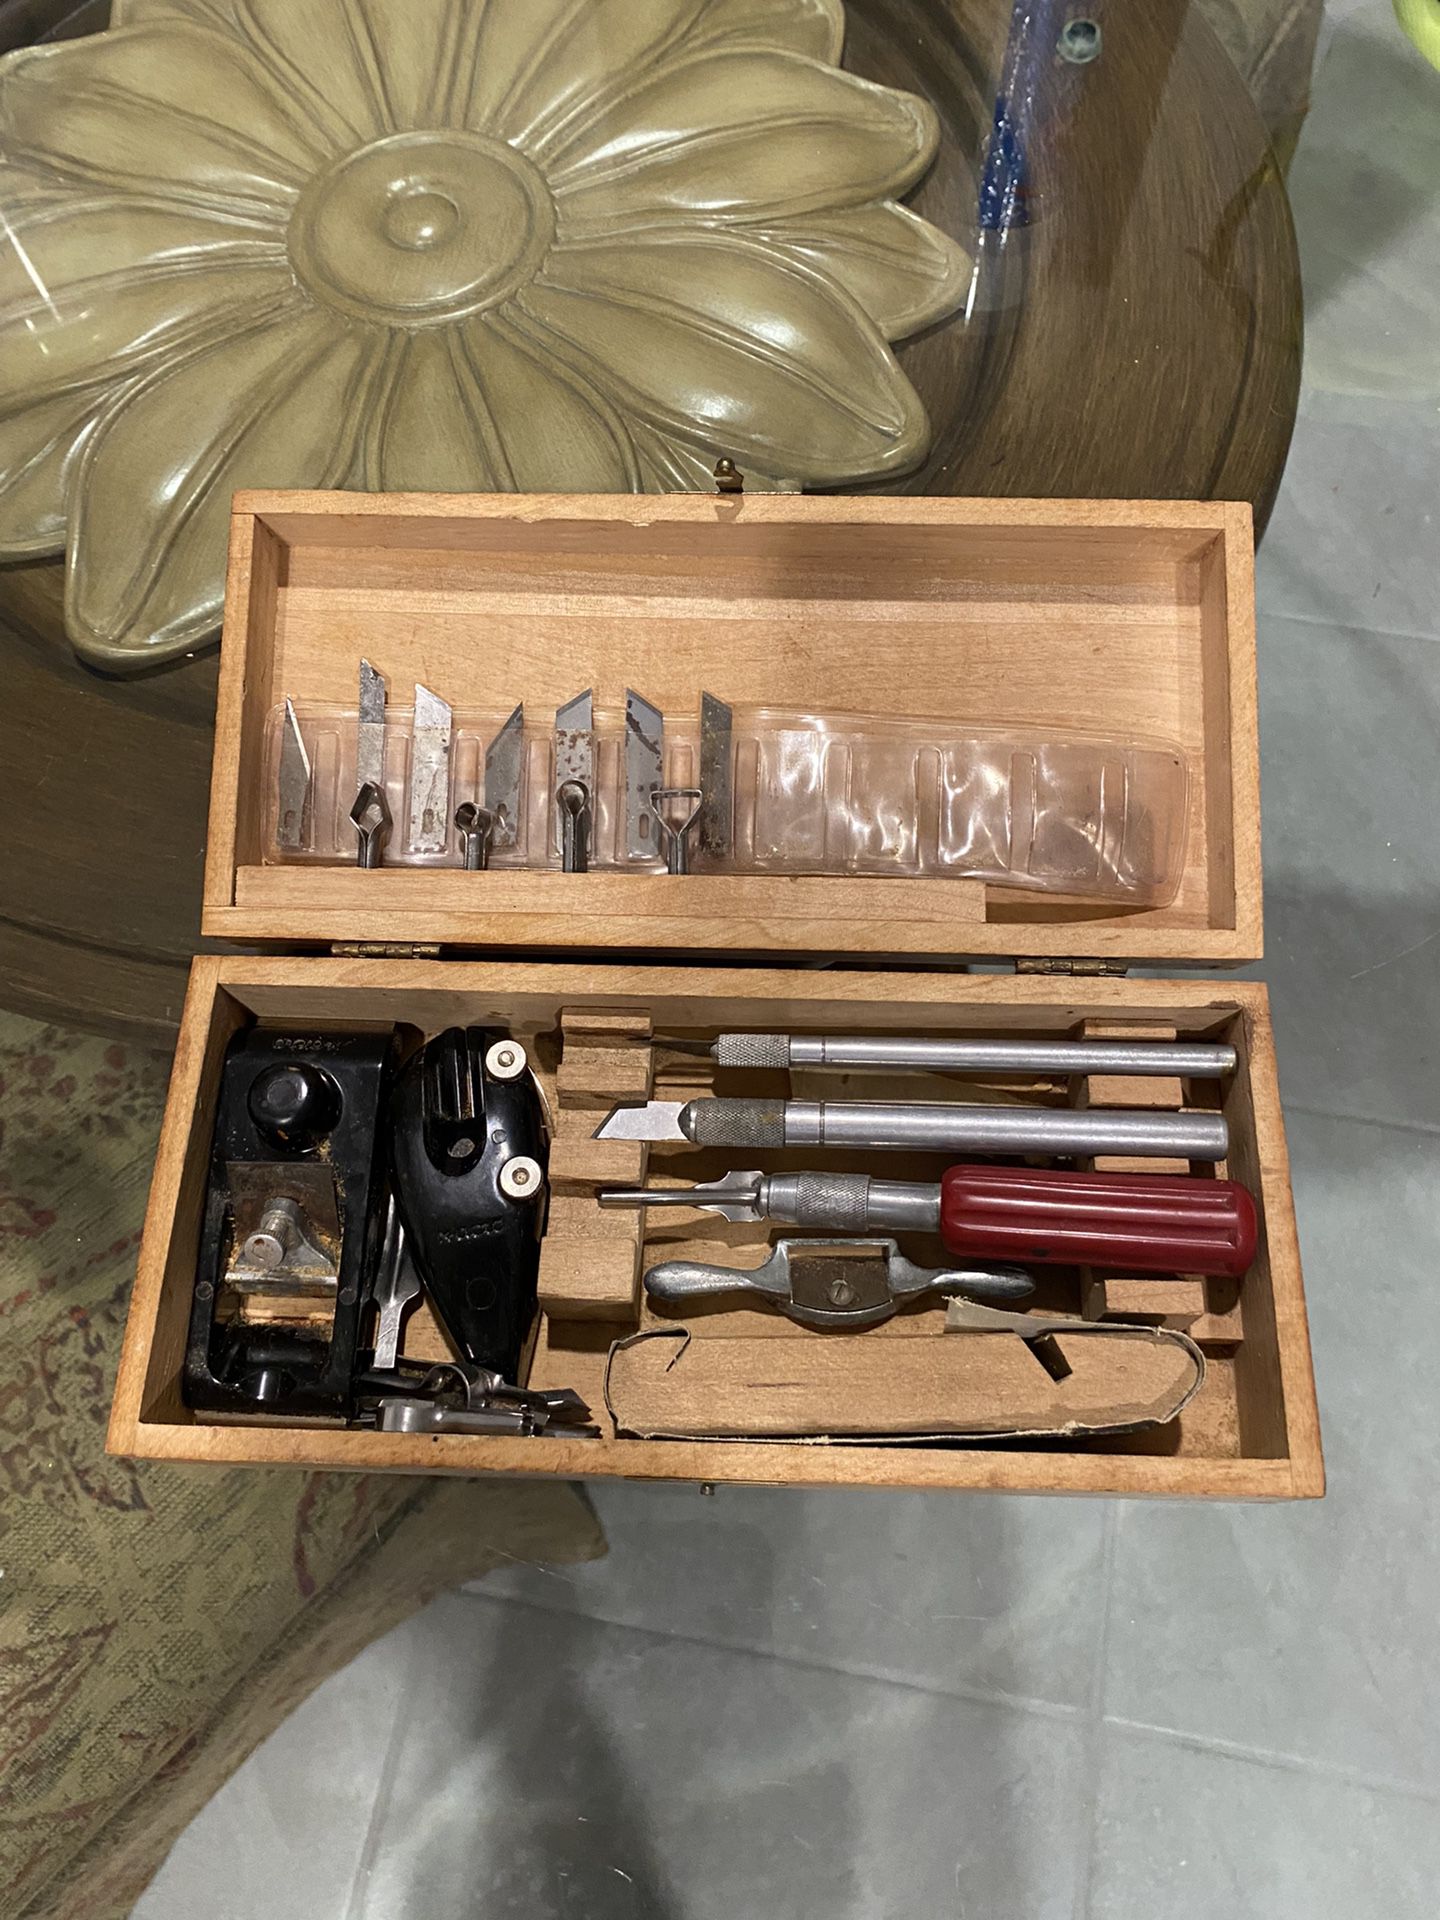 Vintage deluxe X-Acto tool set, includes everything shown in the photos. Case measures approximately 10” x 4.5”